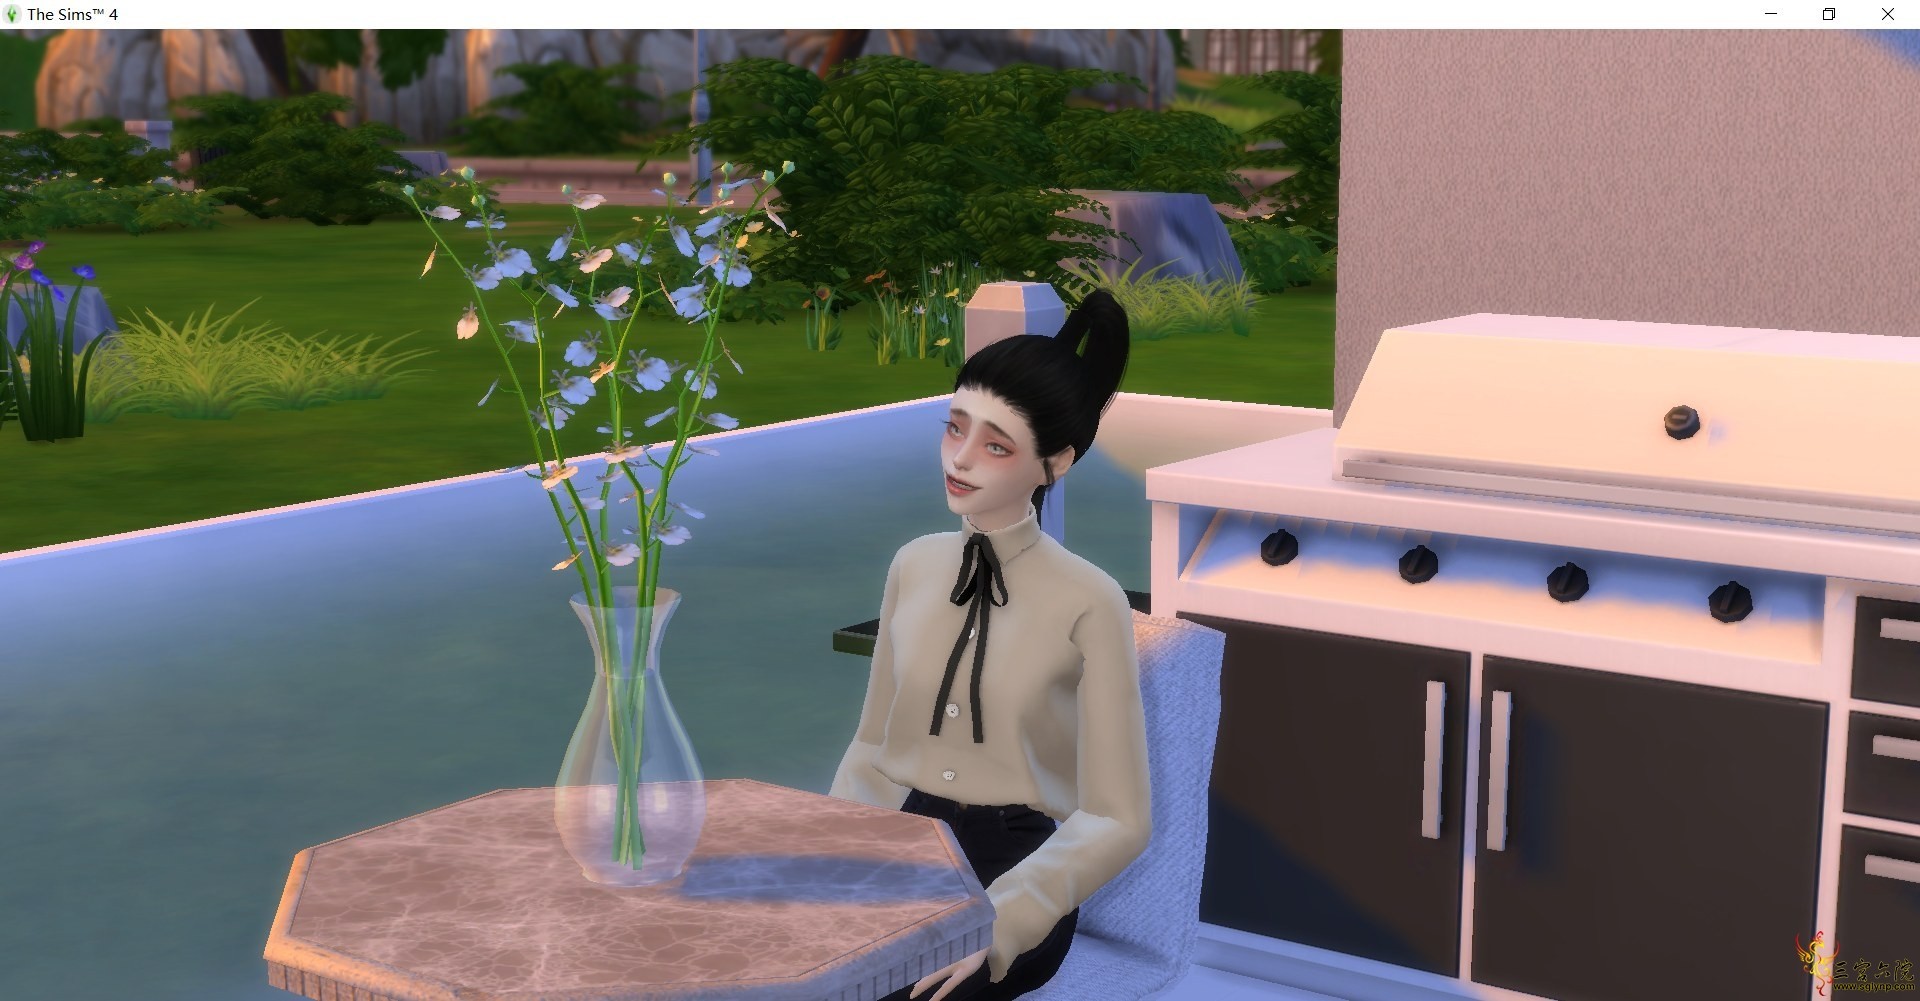 The Sims 4 2020_5_20 2_19_52.png